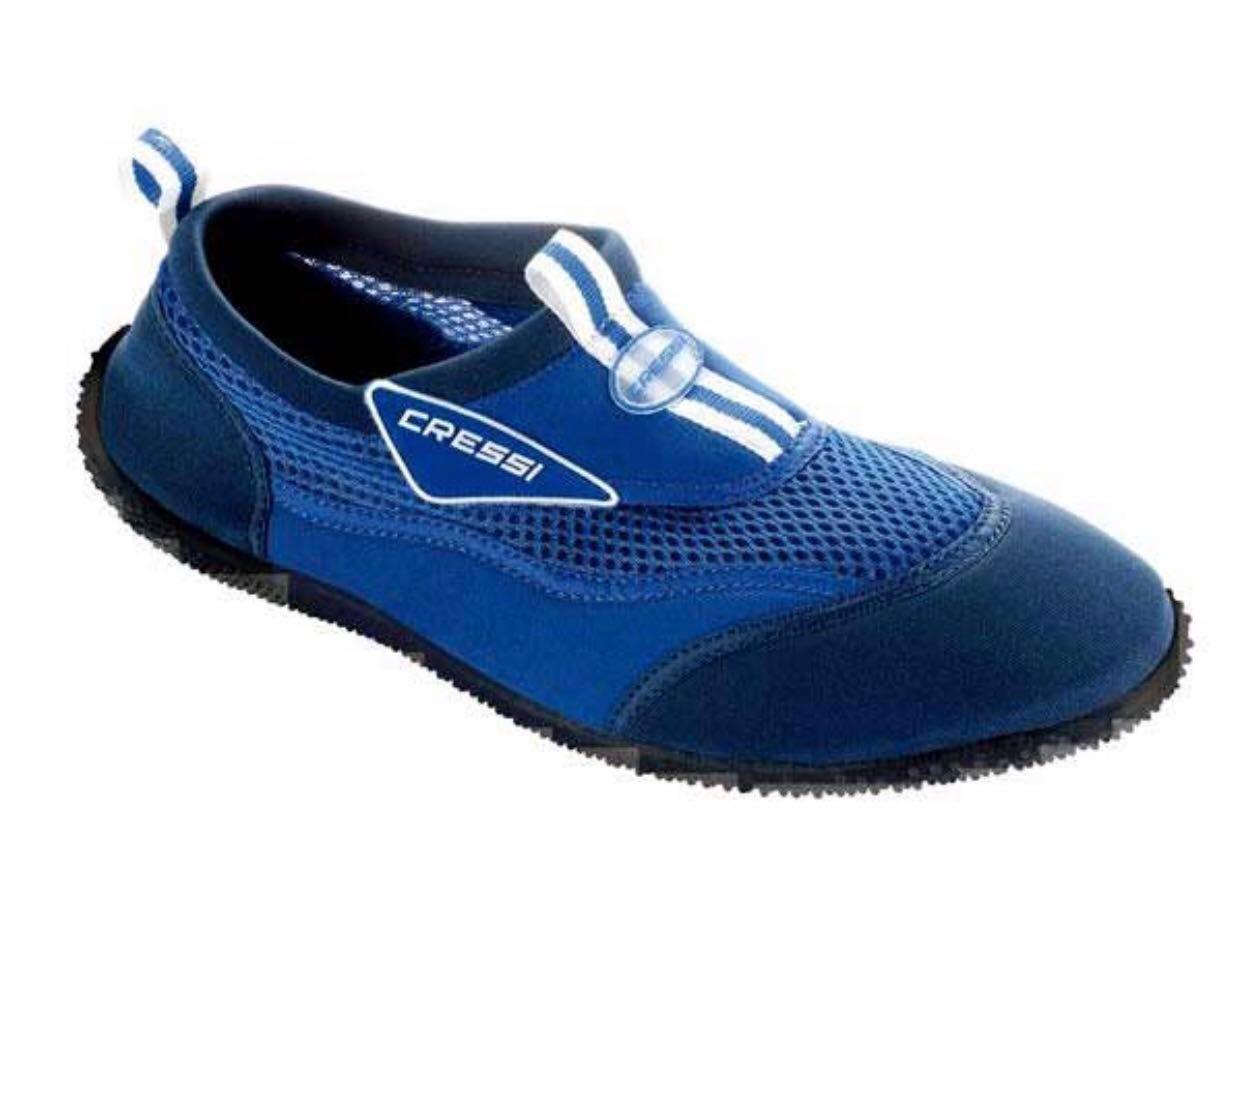 reef shoes